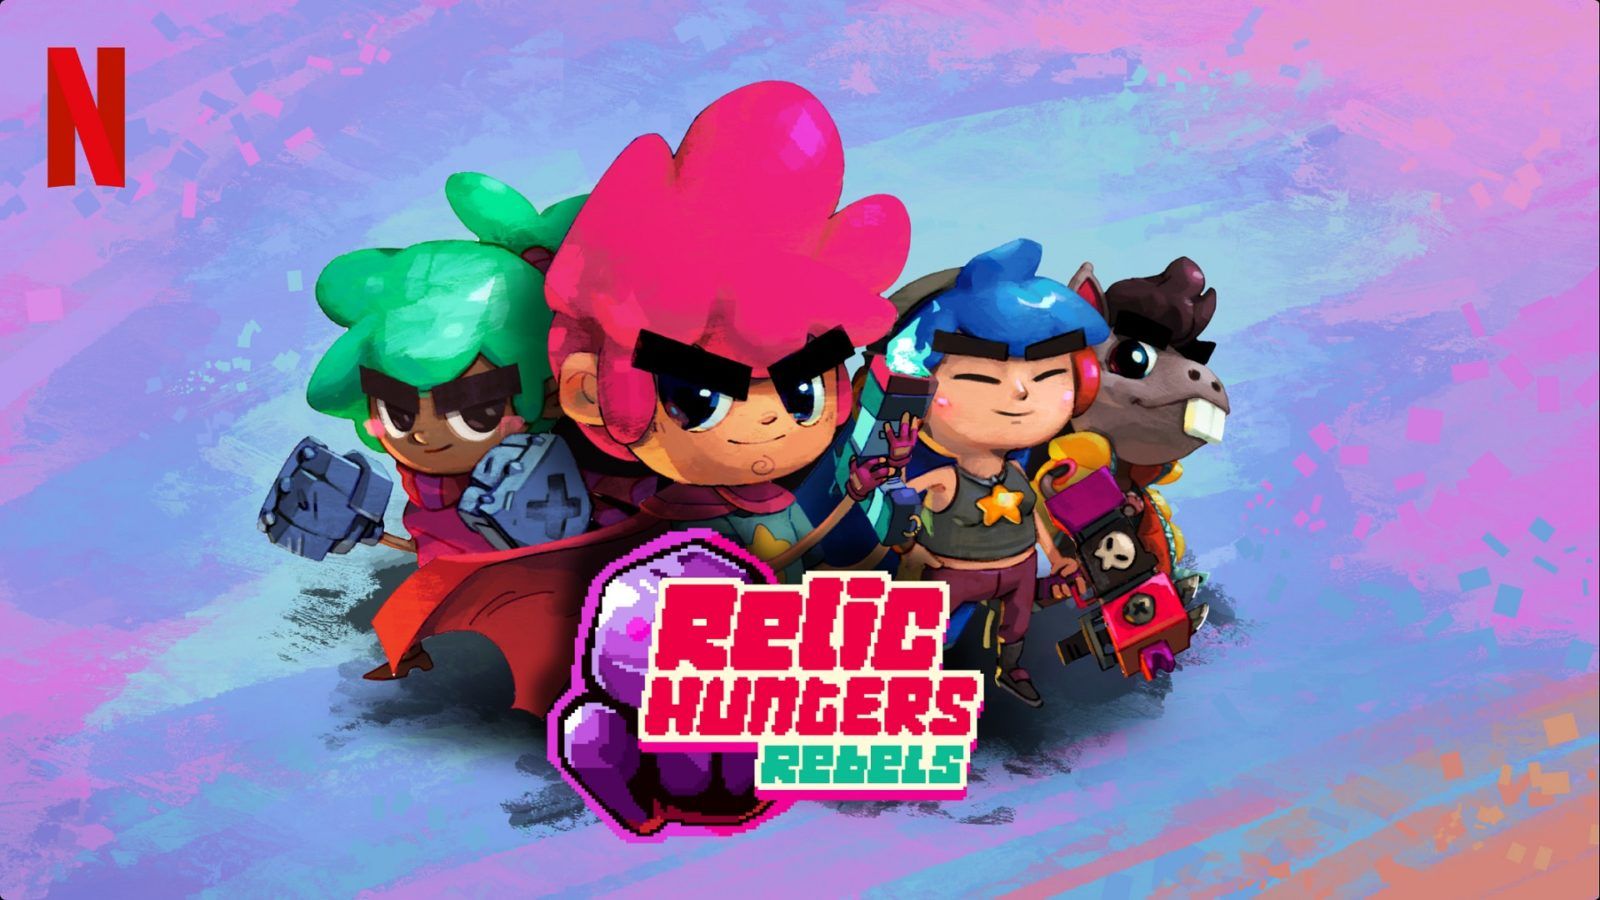 ‘Relic Hunters: Rebels’ mobile RPG is on Netflix